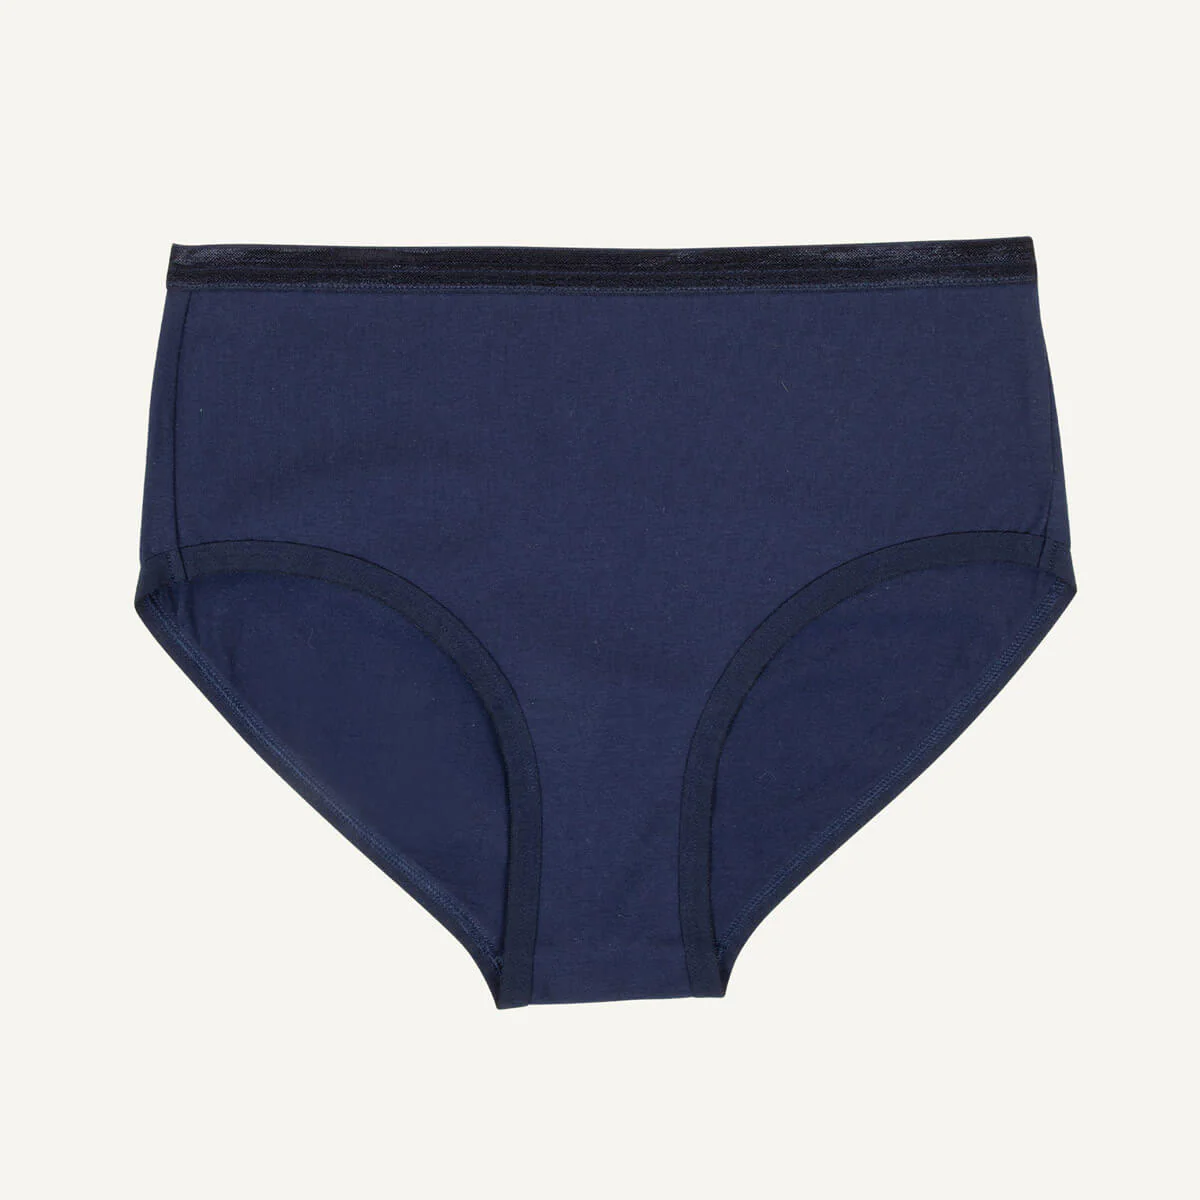 Underwear for Work - Comfort while Active –